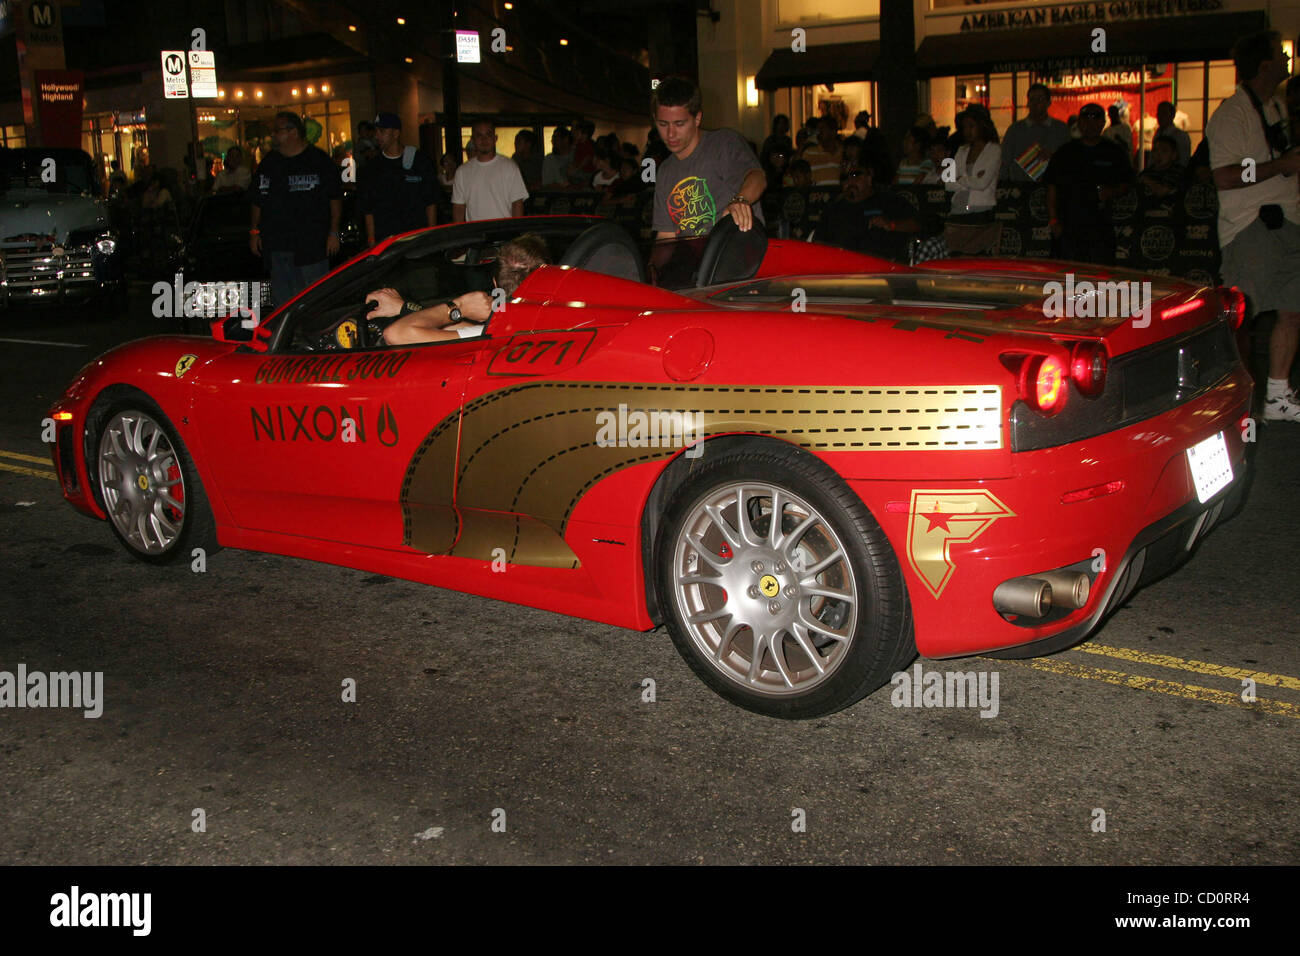 Aug. 9, 2008 - Hollywood, California, U.S. - I13572CHW.GUMBALL 3000  CELEBRATES IT'S 10TH ANNIVERSARY WORLD TOUR WITH A LOS ANGELES VIP PARTY  SPONSORED BY PUMA.TROPICANA BAR AT THE ROOSEVELT HOTEL, HOLLYWOOD, CA .